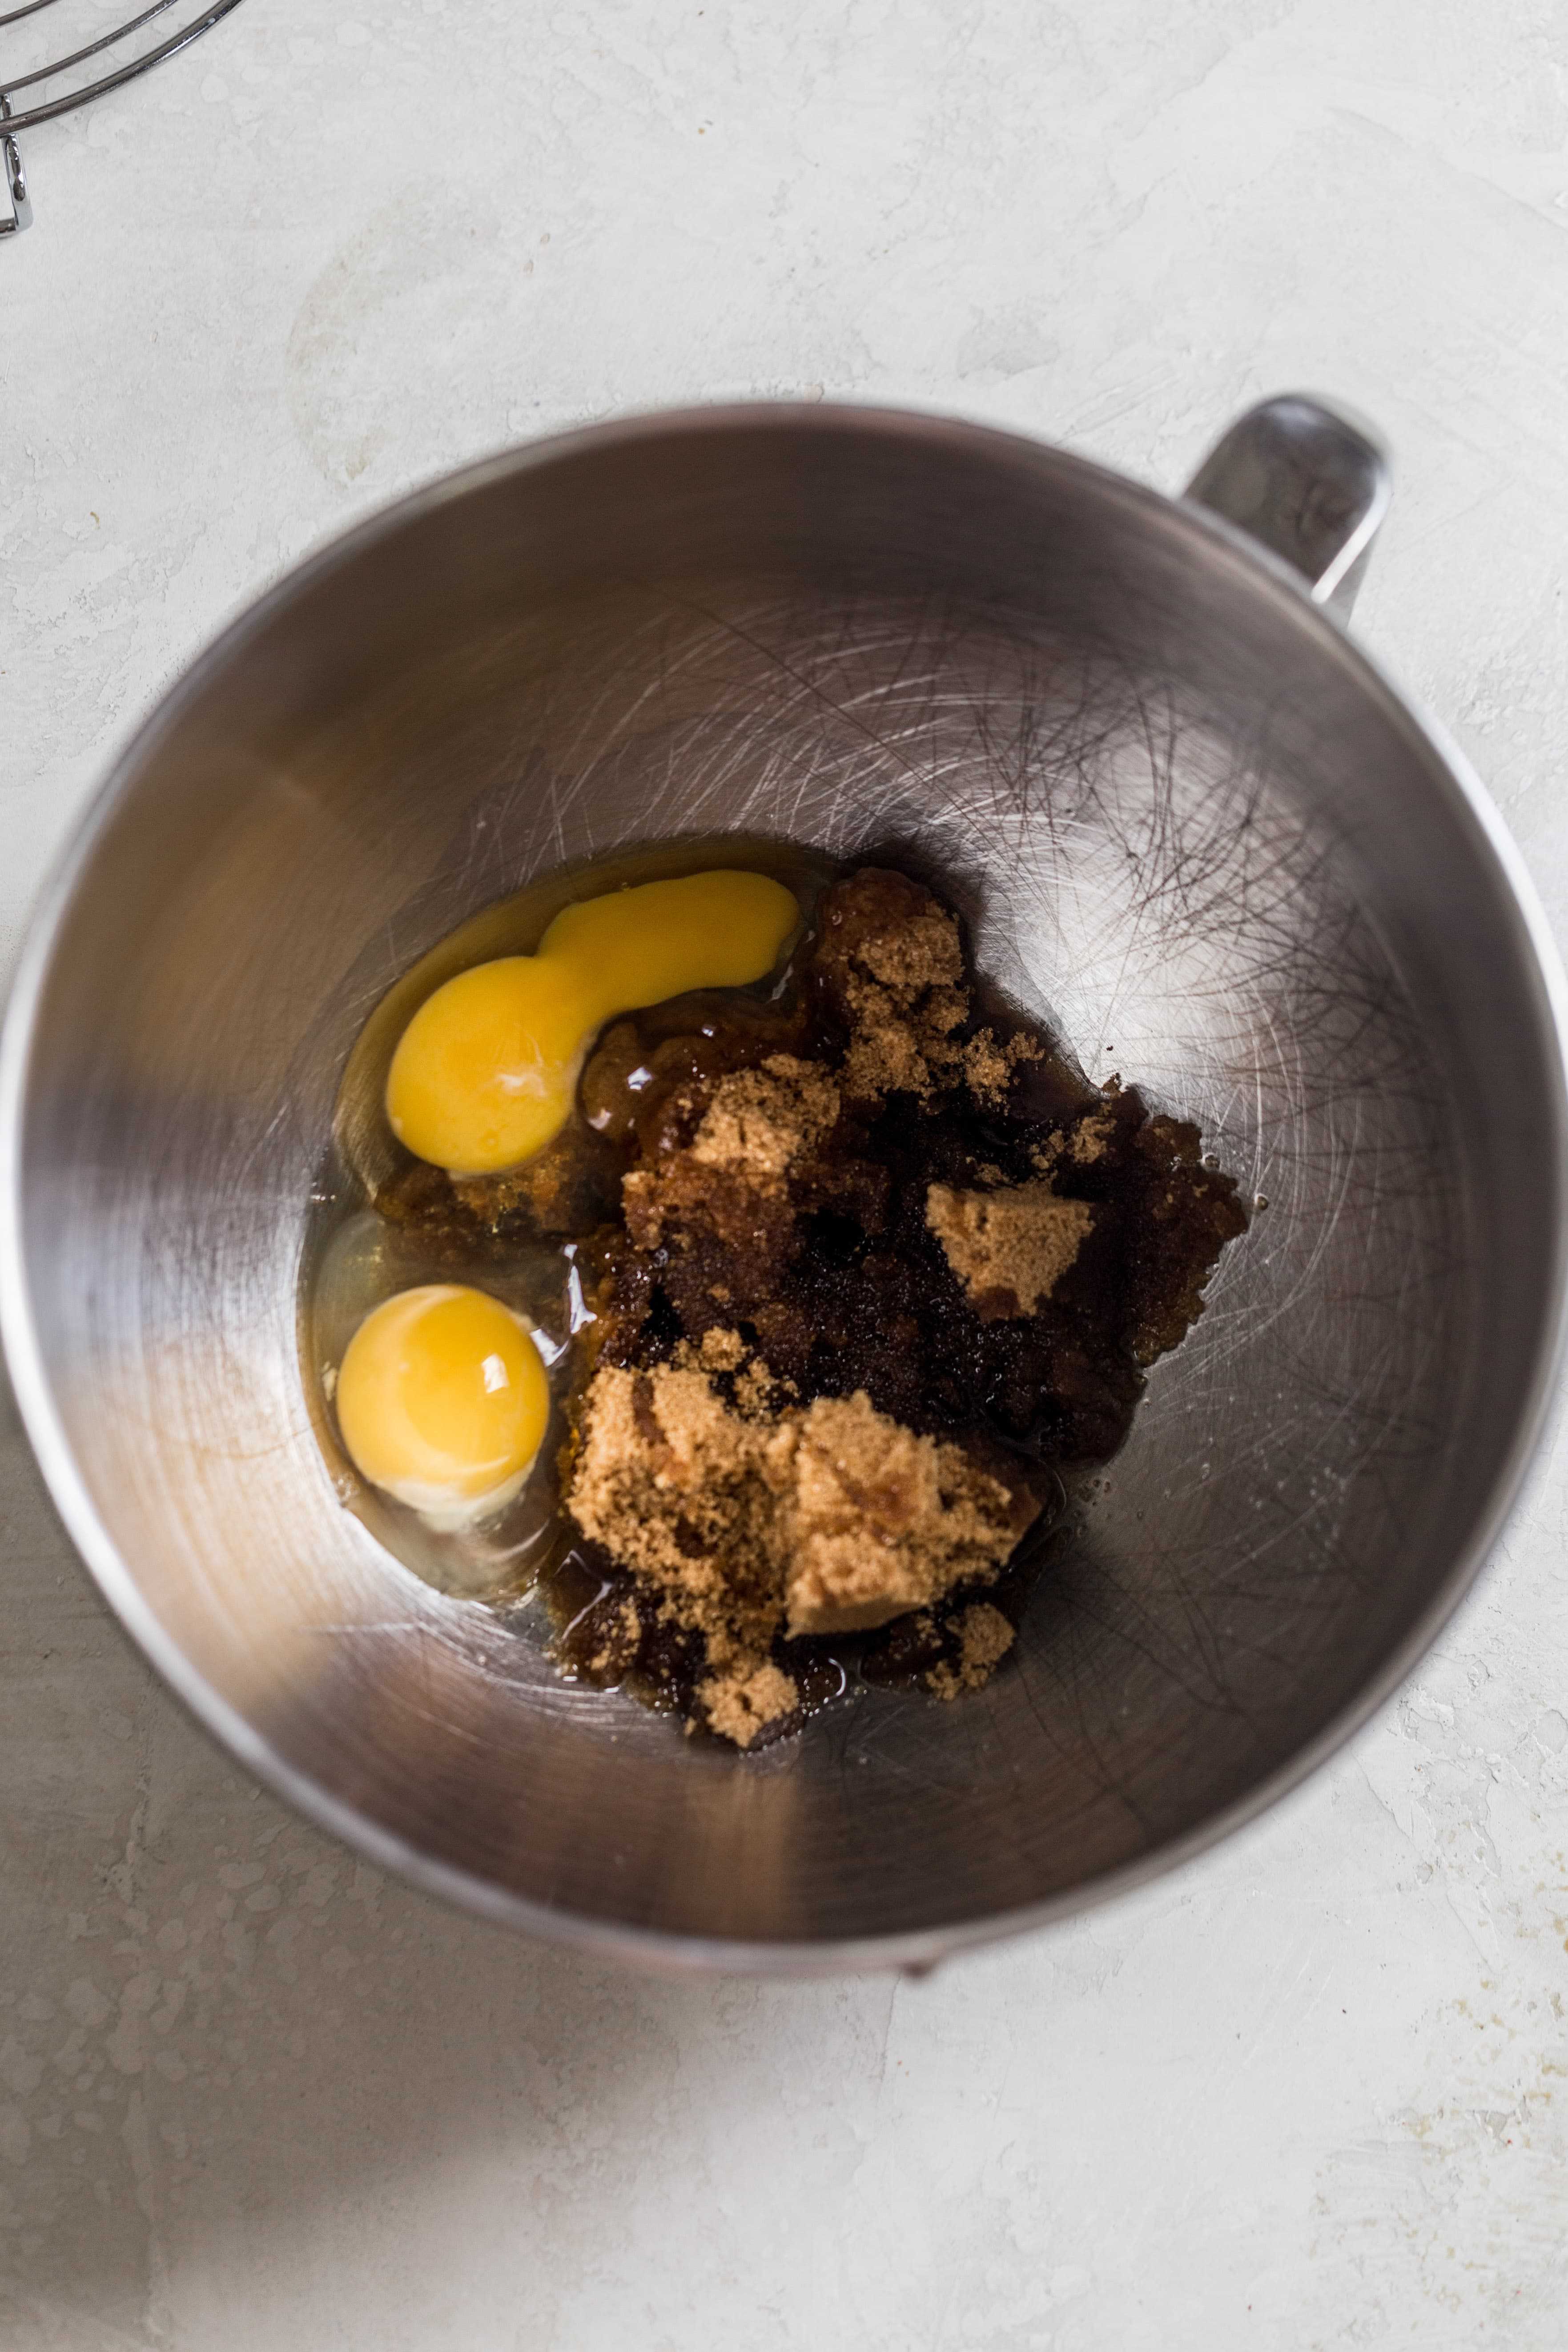 Eggs and sugar in a mixing bowl on a gray surface